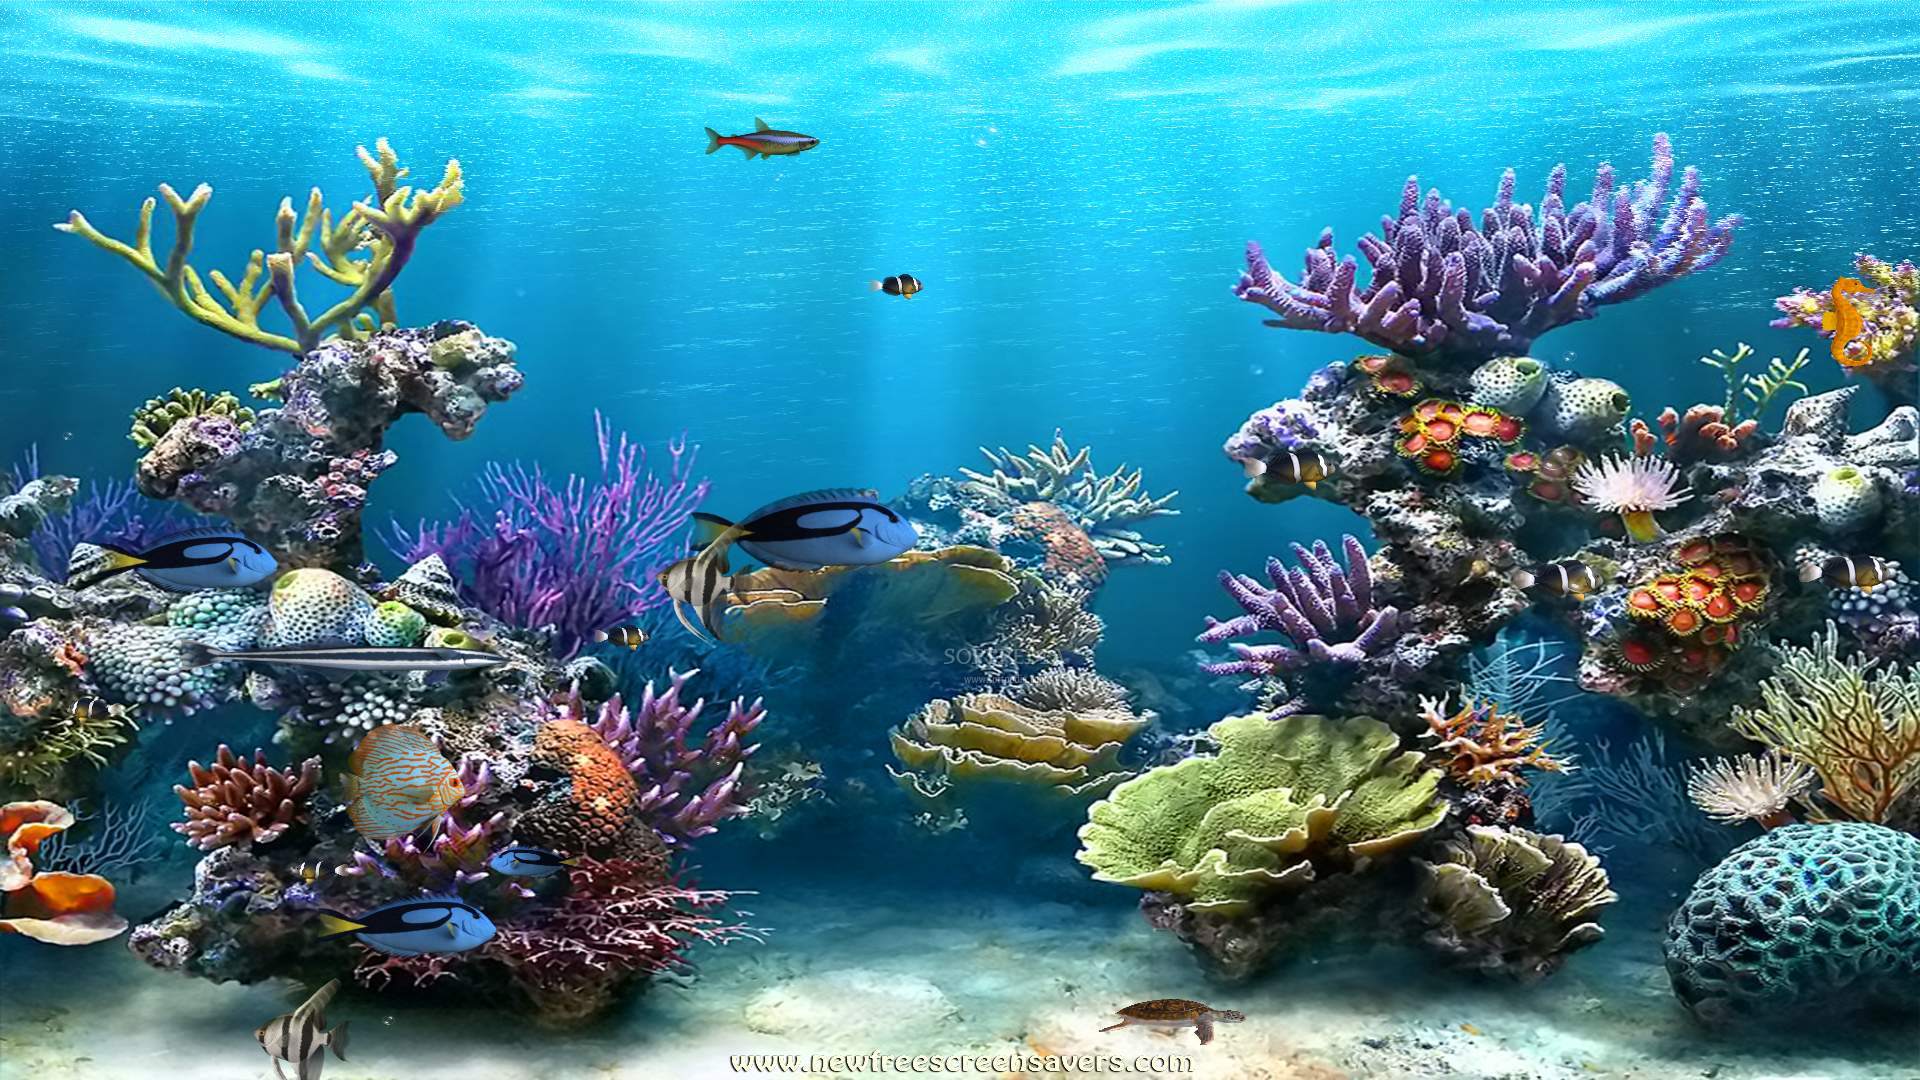 underwater wallpaper,coral reef,reef,marine biology,stony coral,natural environment